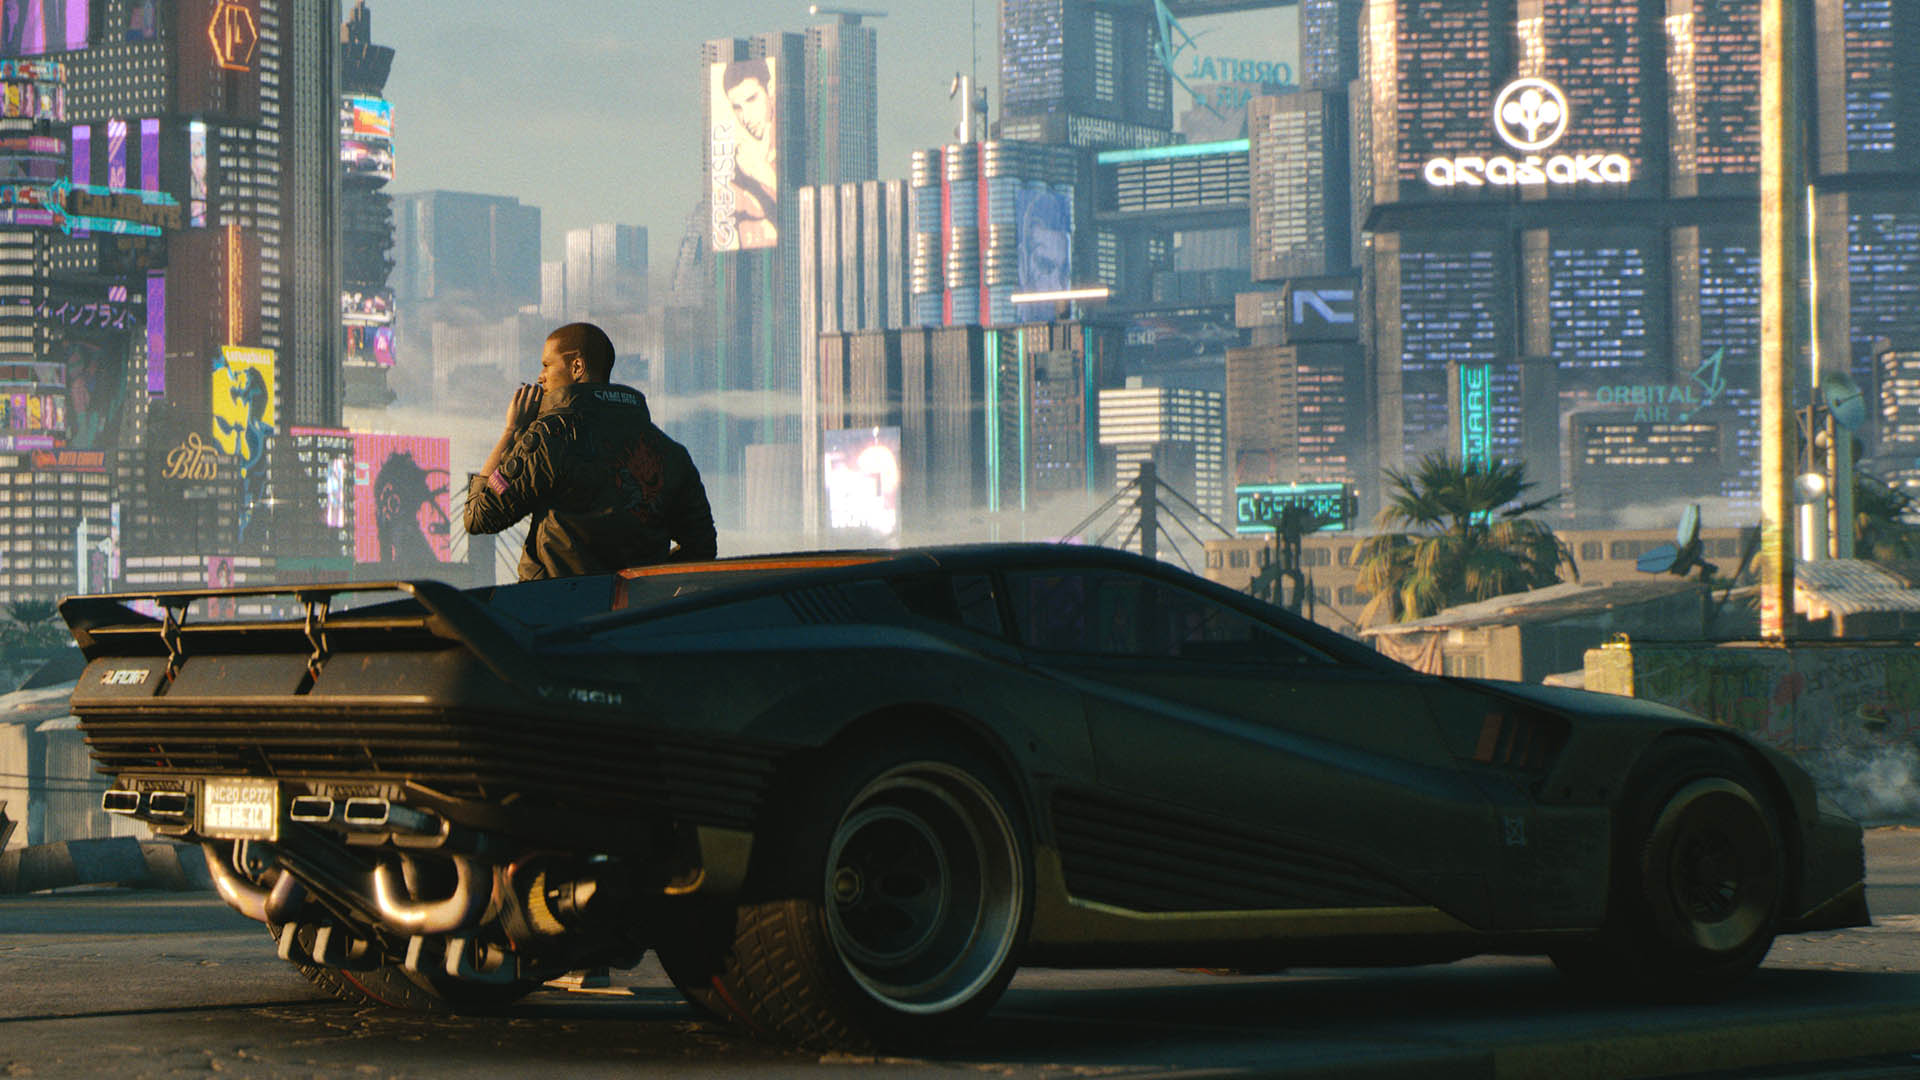 Cyberpunk 2077 Review - An Irresistible World to Explore 12